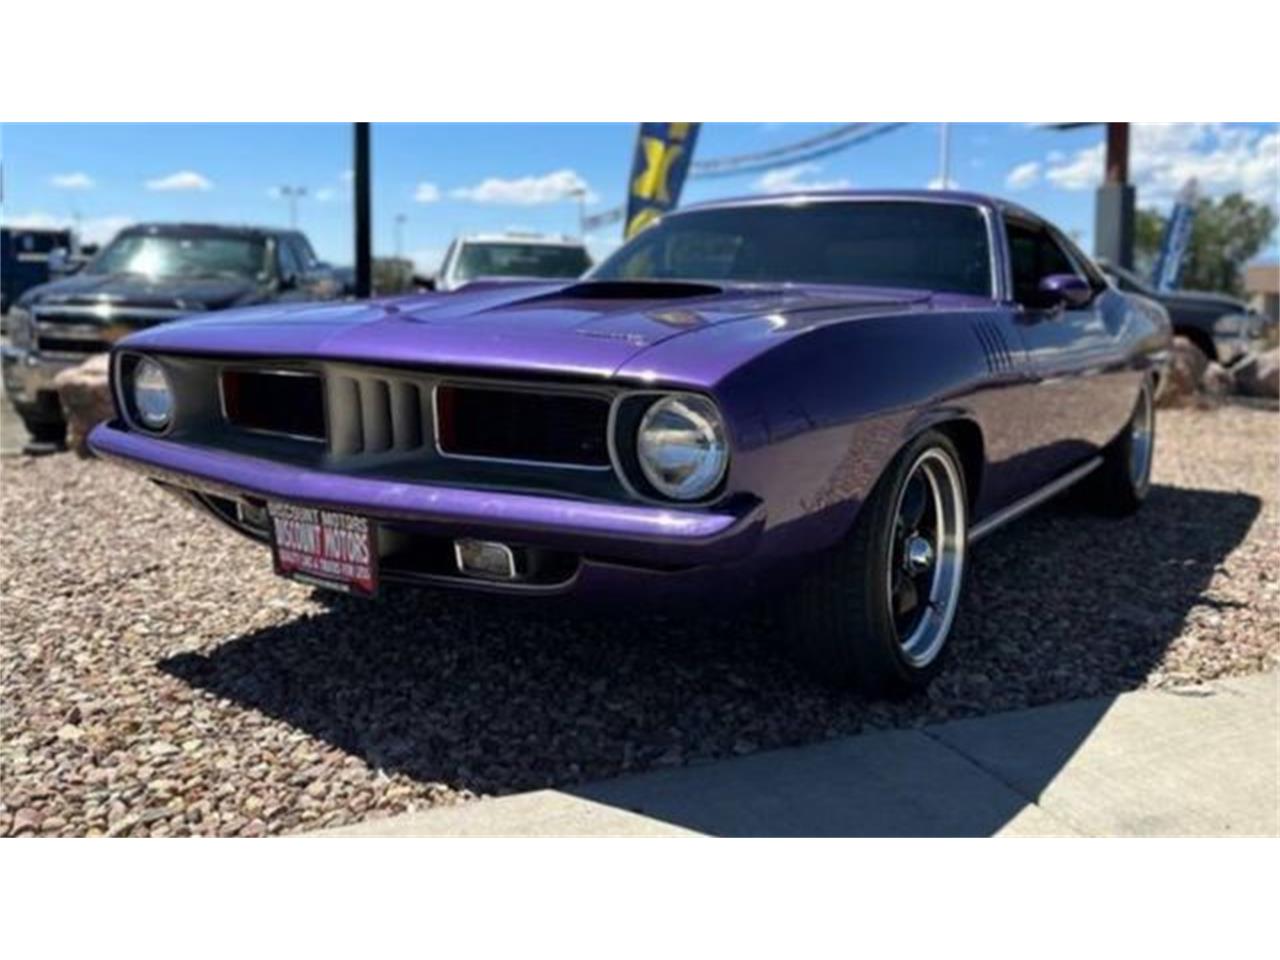 For Sale: 1974 Plymouth Barracuda in Valley Park, Missouri for sale in Valley Park, MO